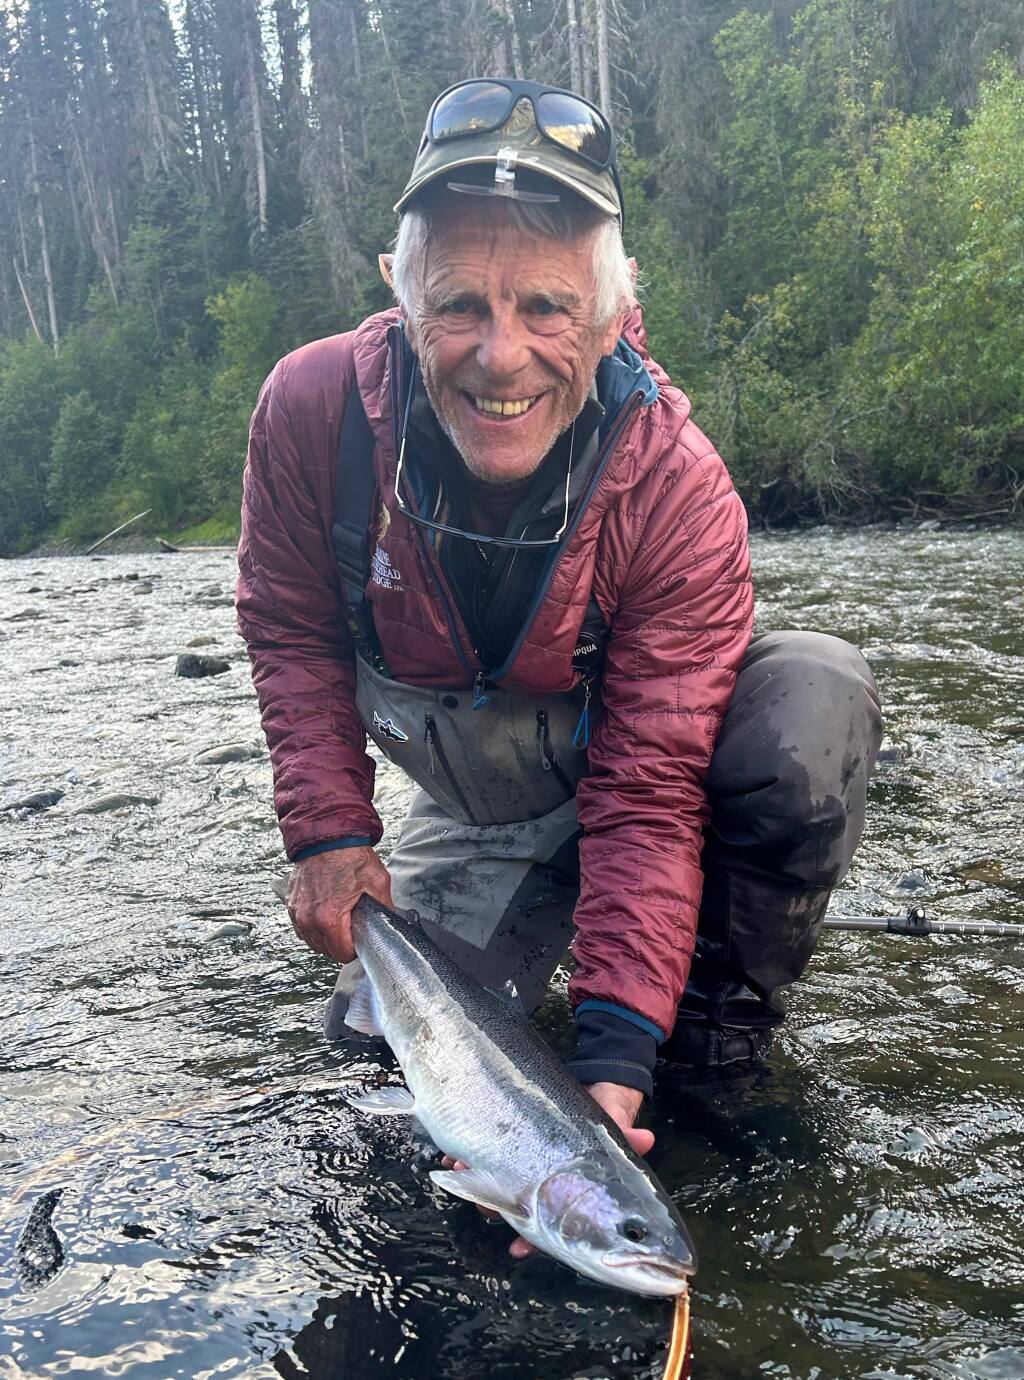 Steve Kyle caught and released this very fresh steelhead while fly-fishing in British Columbia last week. It was the only fish he hooked, but he did manage to bury his hook into his right ear, which gave him a nice pirate look. Unfortunately, there were no parrots to place on his shoulder, so he removed the hook before returning to Sonoma. (submitted photo)